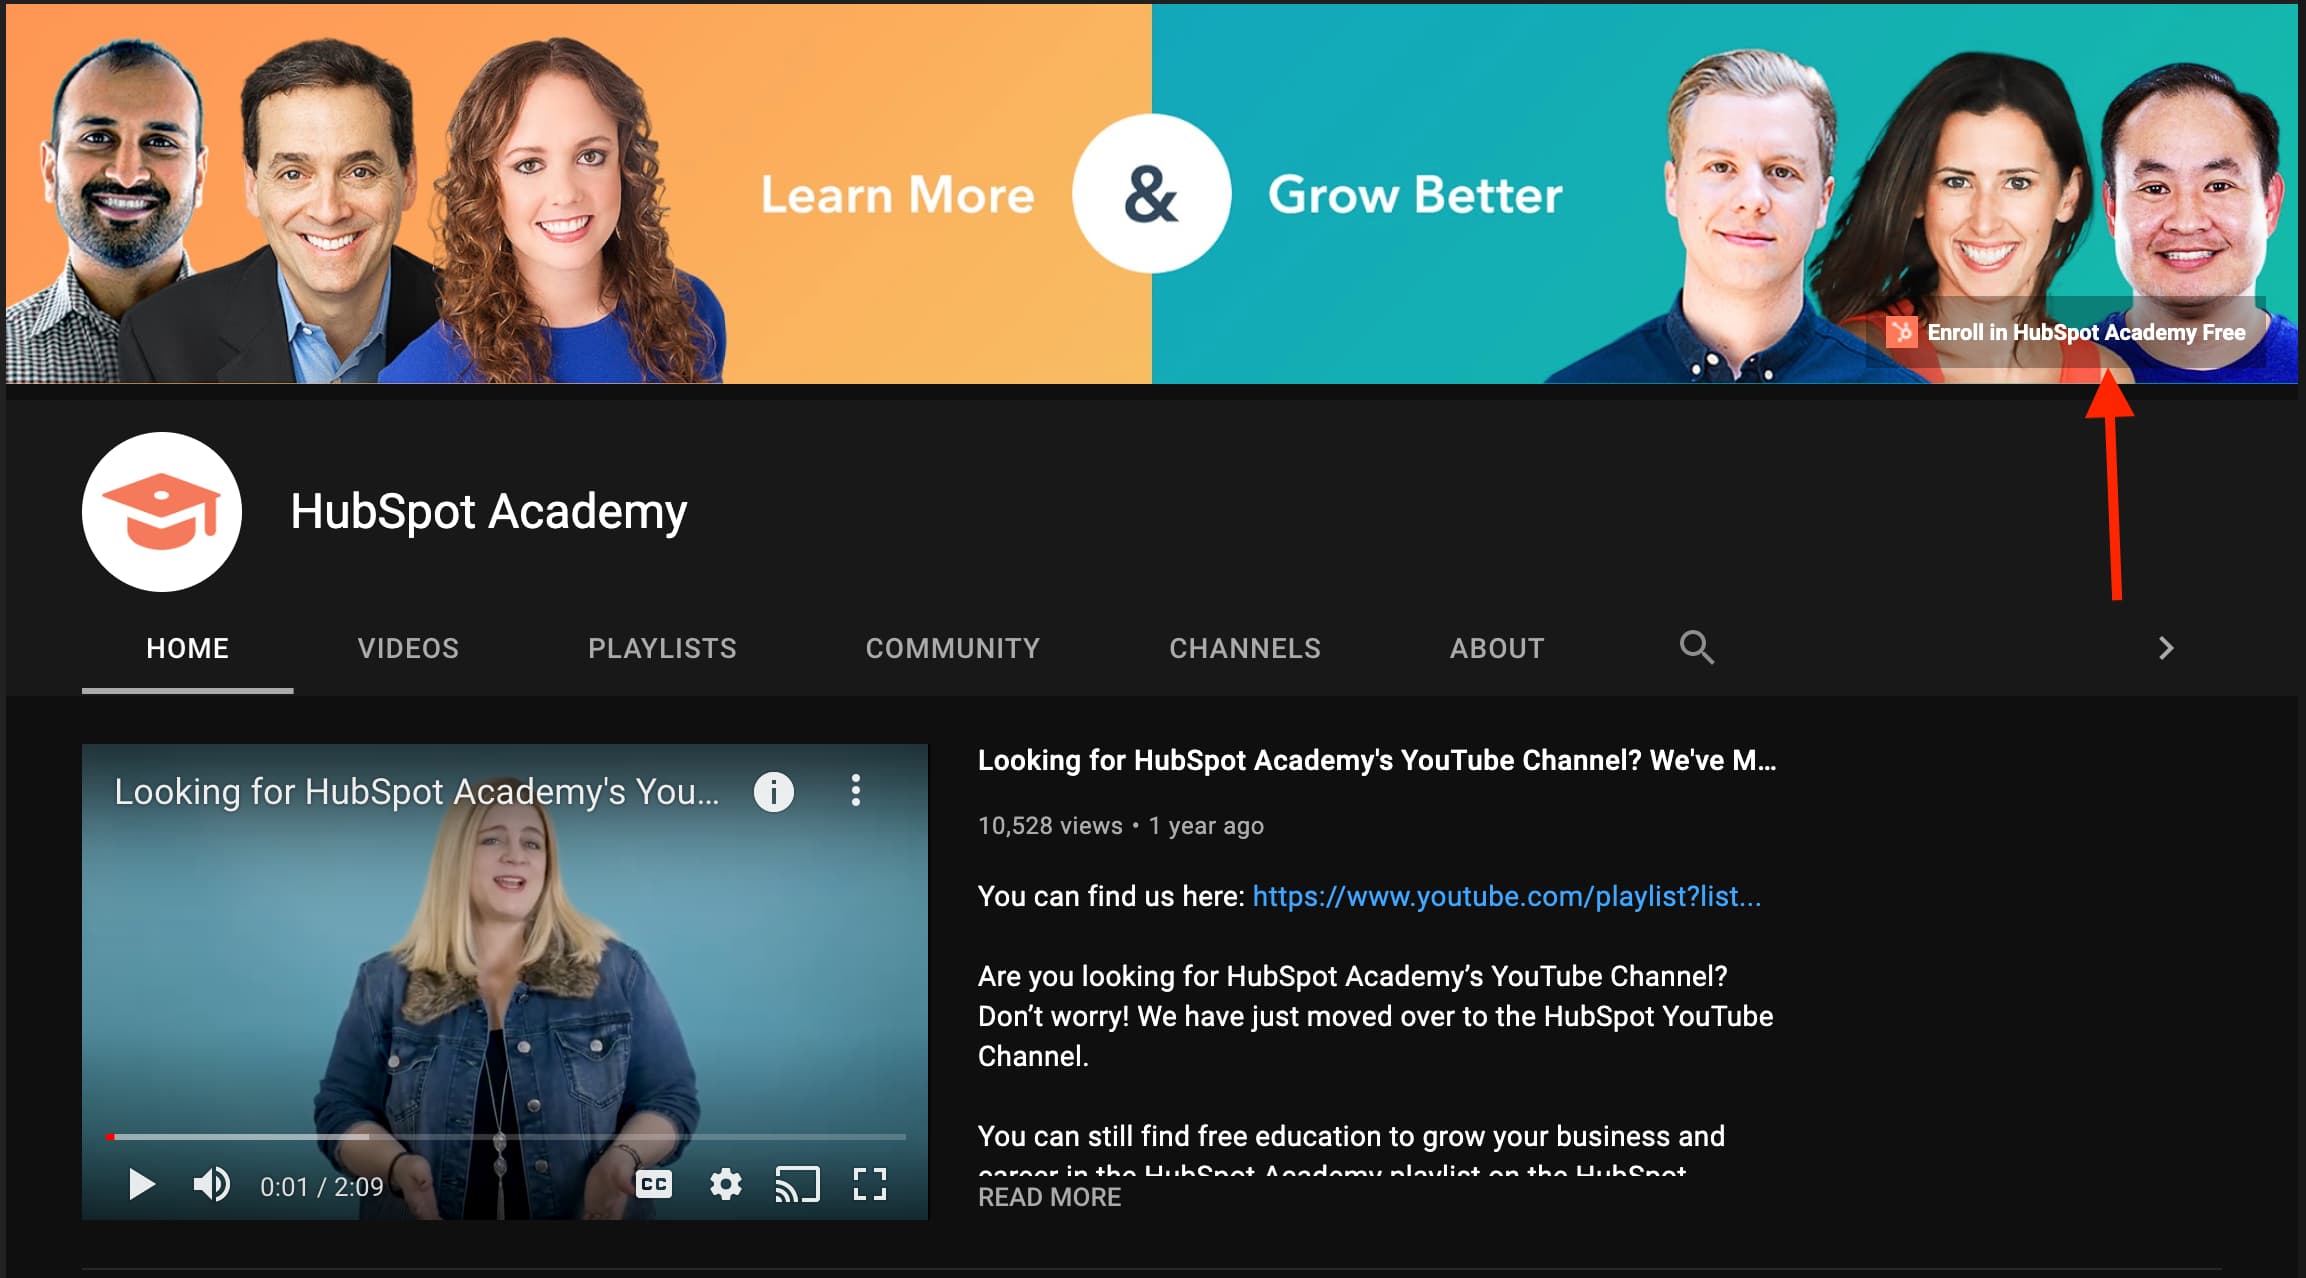 mailing list sign up tip: hubspot academy youtube channel sign up link CTA